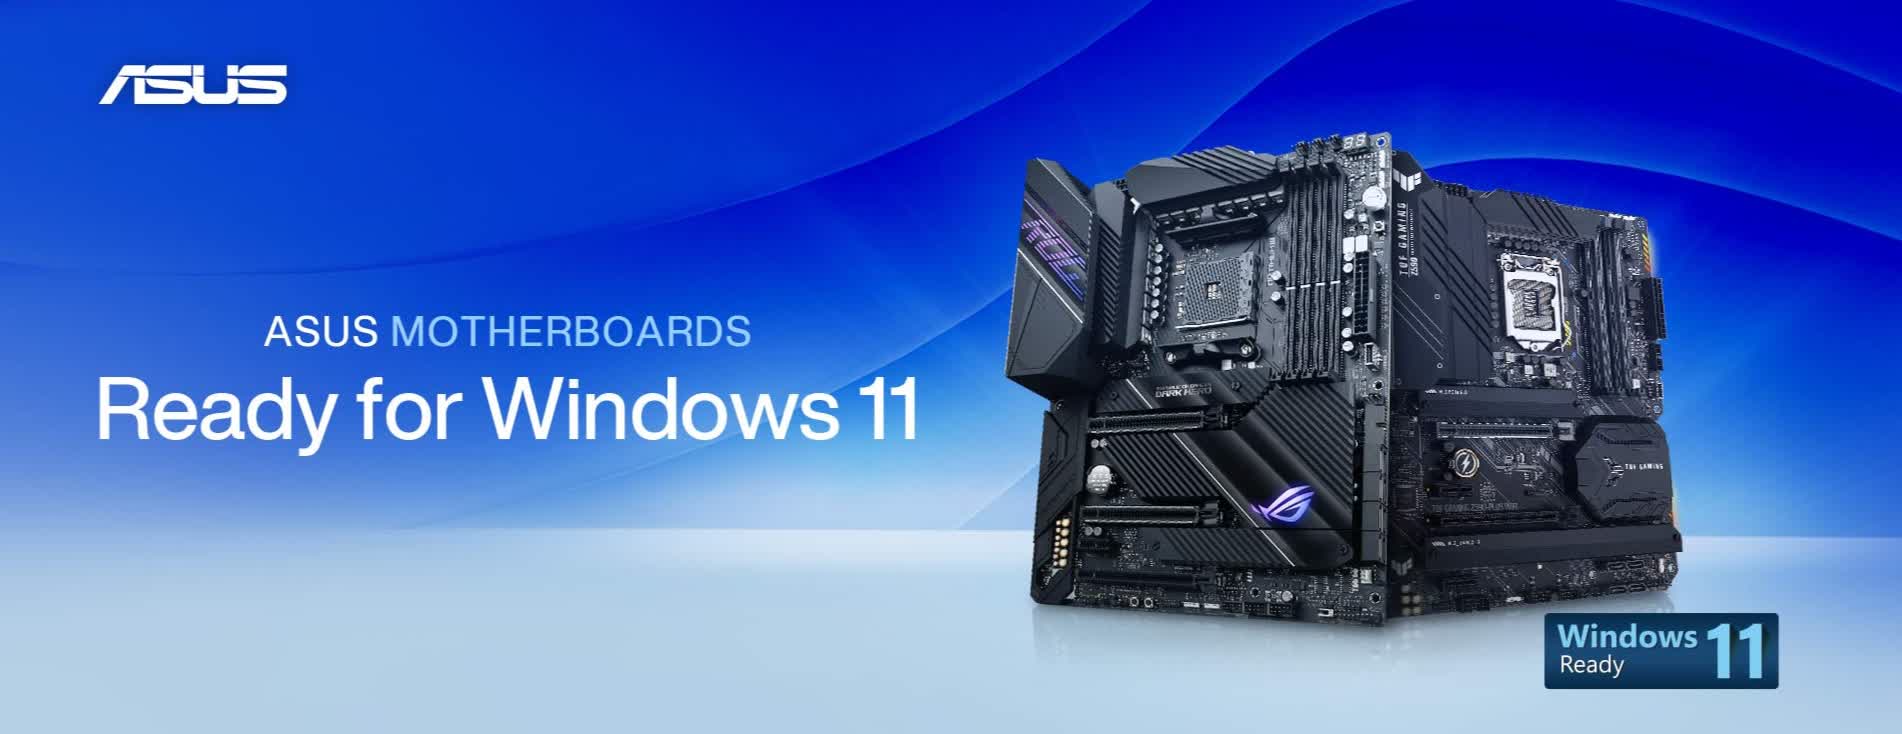 Motherboard makers are releasing updates to help with Windows 11 compatibility